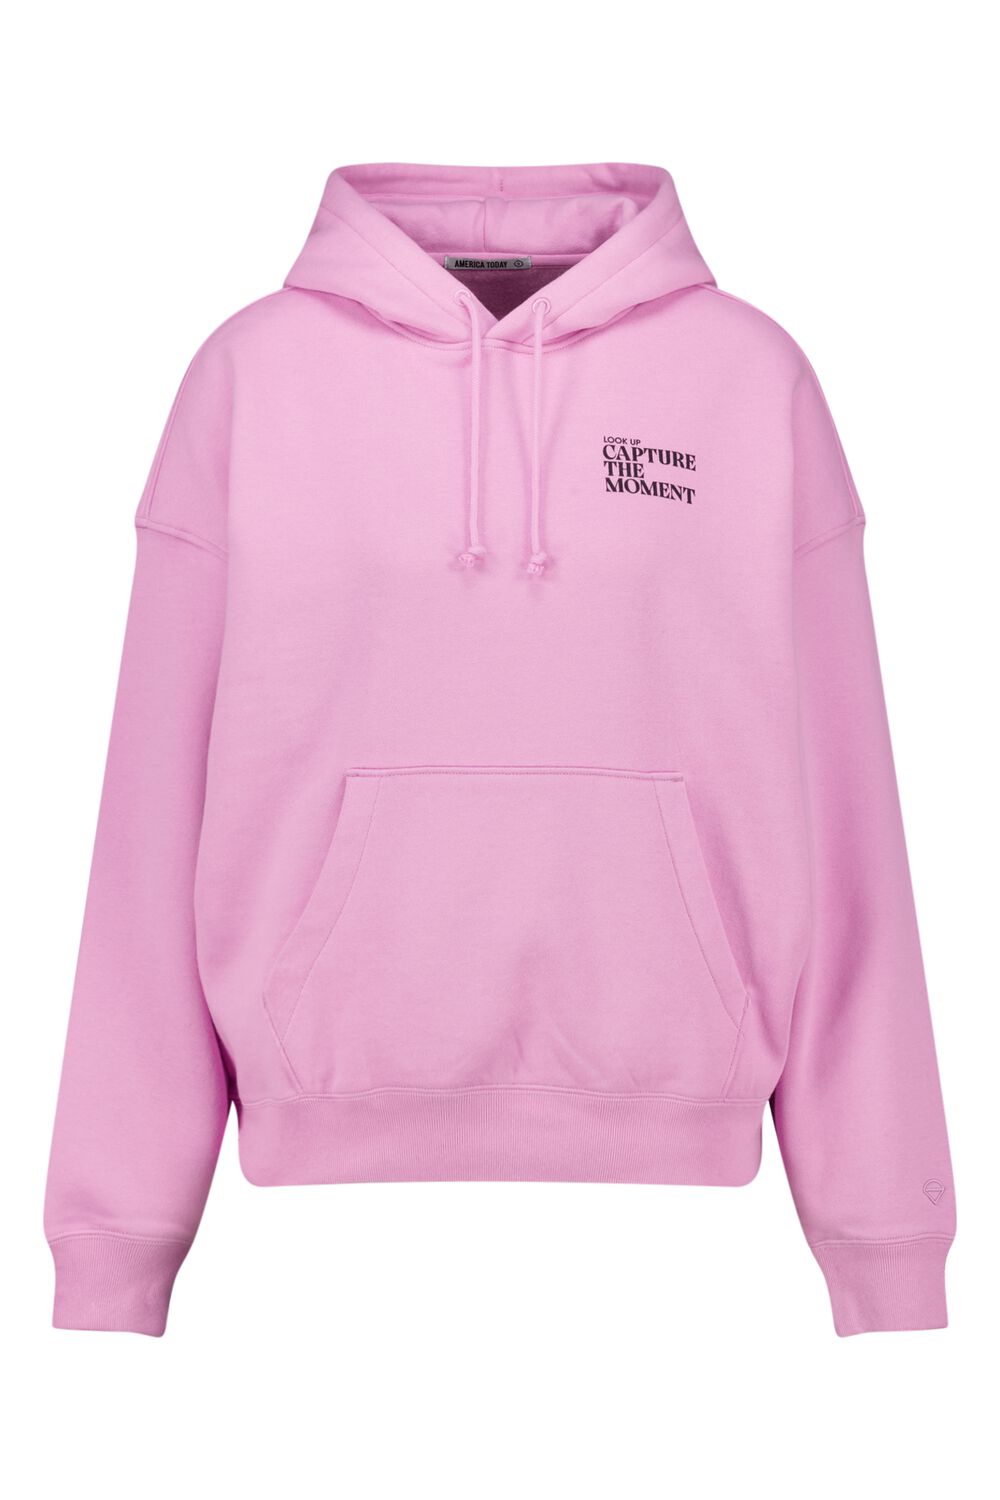 America Today Dames Hoodie Susy Roze